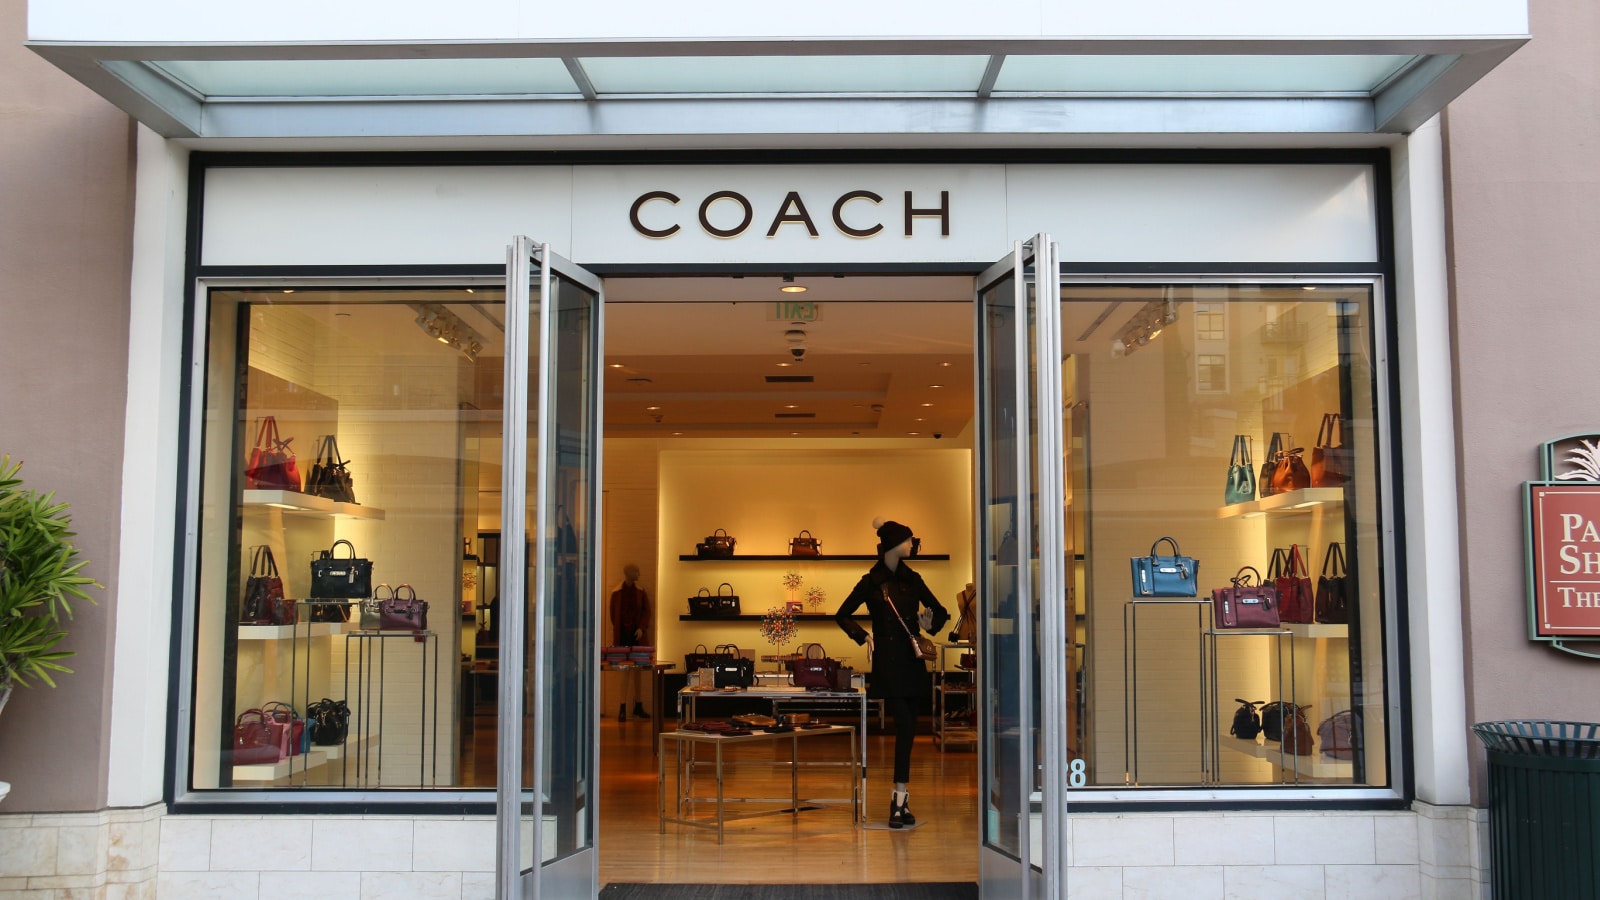 Pasadena, California, USA - November 15, 2015: Coach, Inc., based in New York City, is a luxury fashion company known for accessories for women and men.